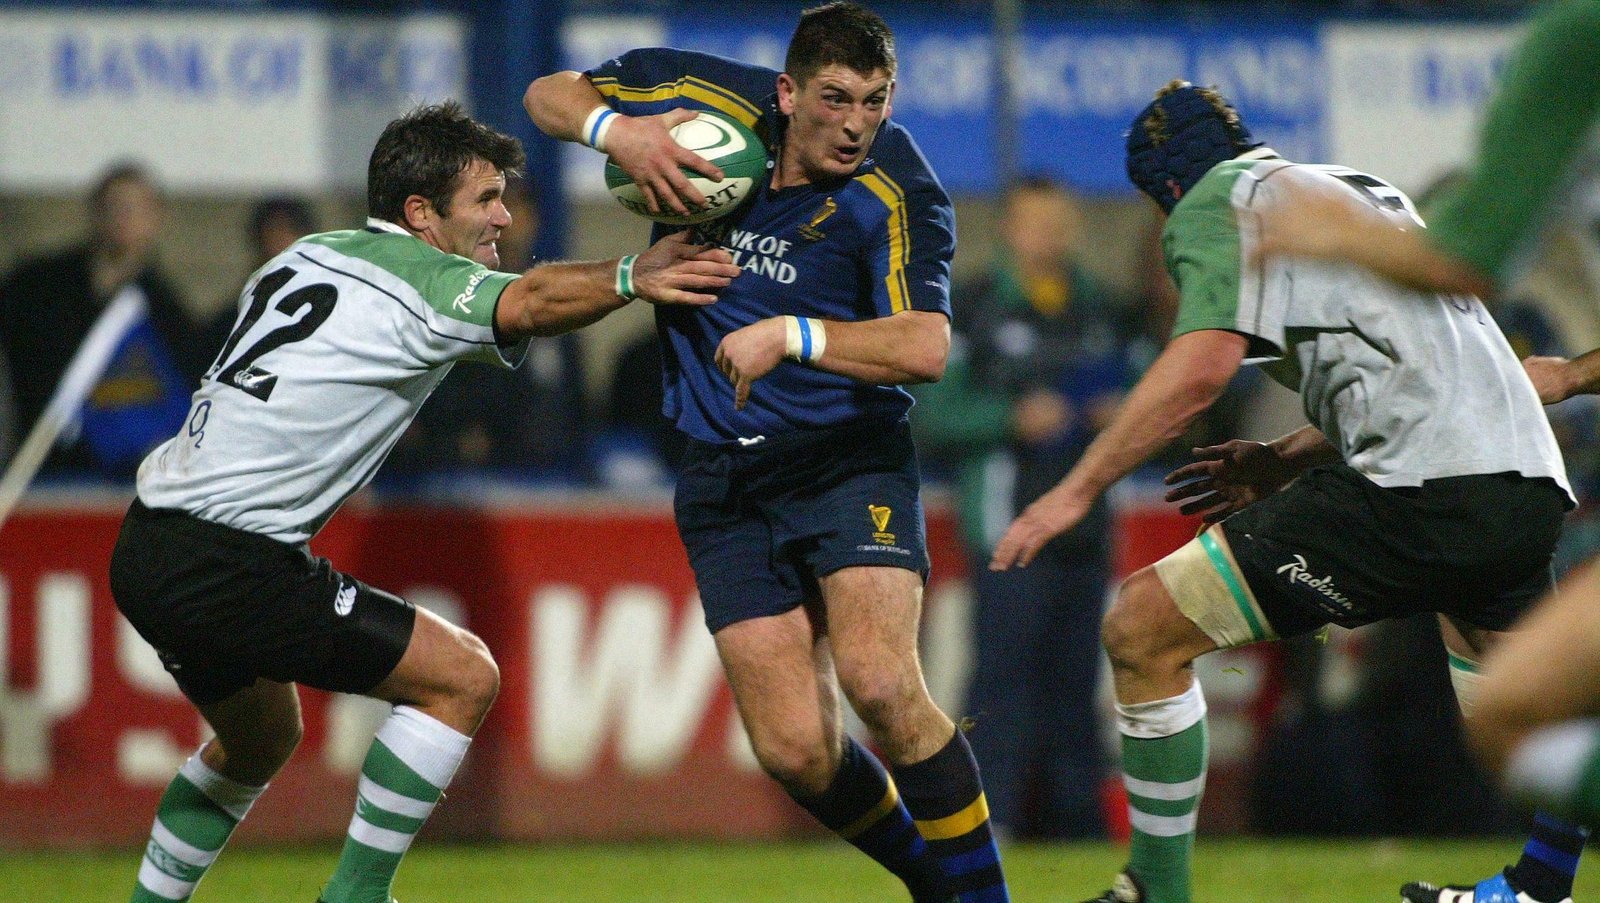 Image - Connacht were the opponents in one of his three Leinster appearances